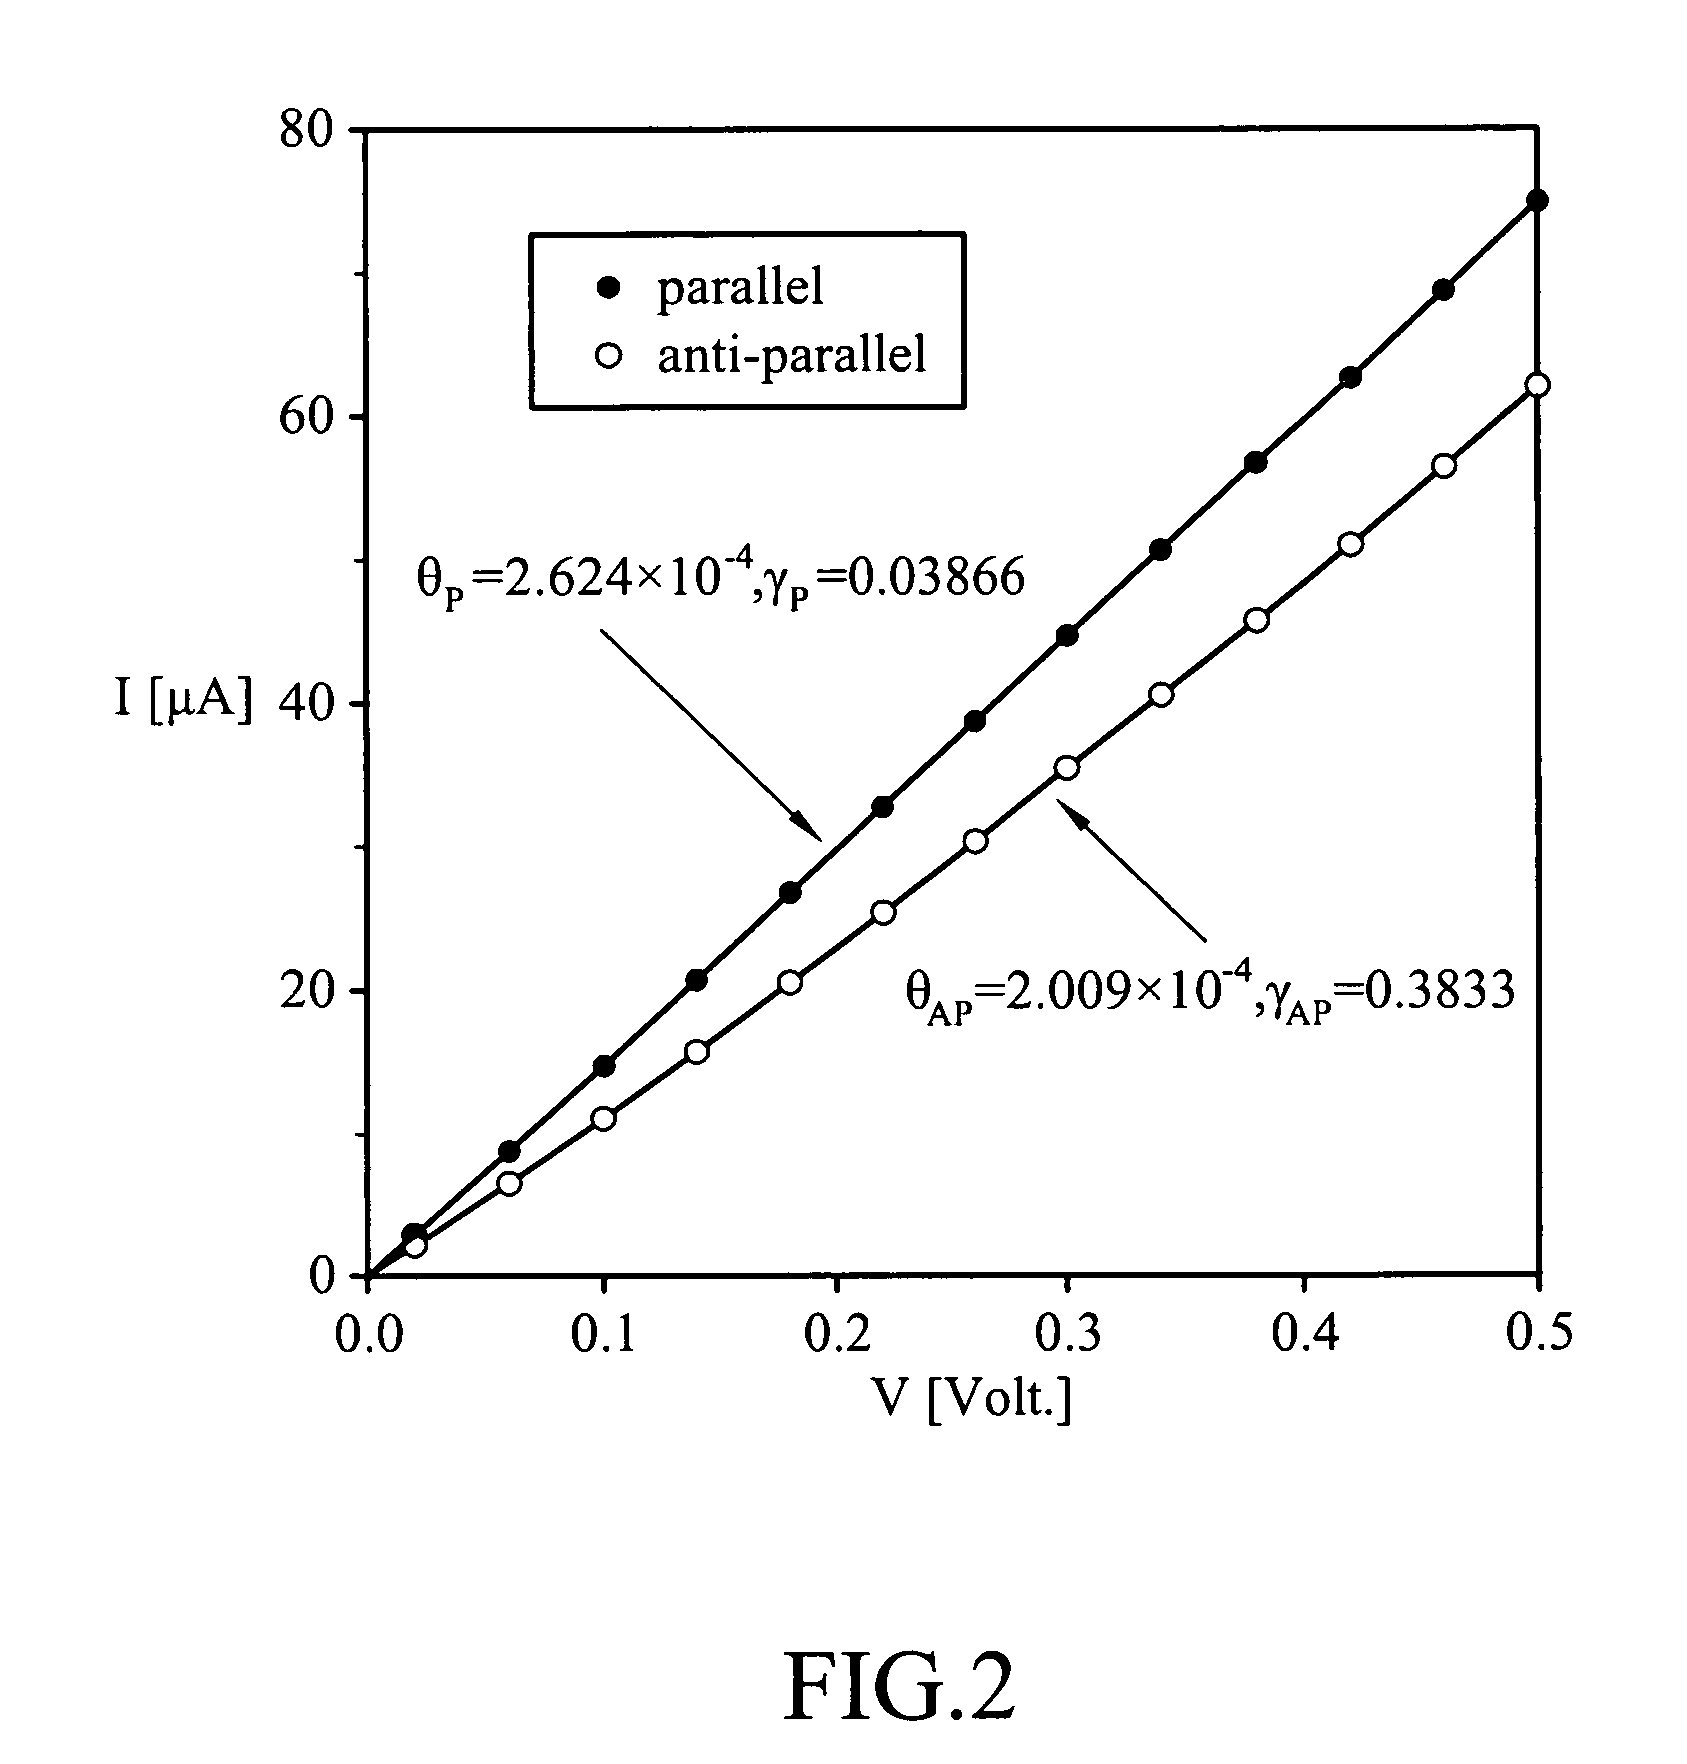 Simulating circuit for magnetic tunnel junction device